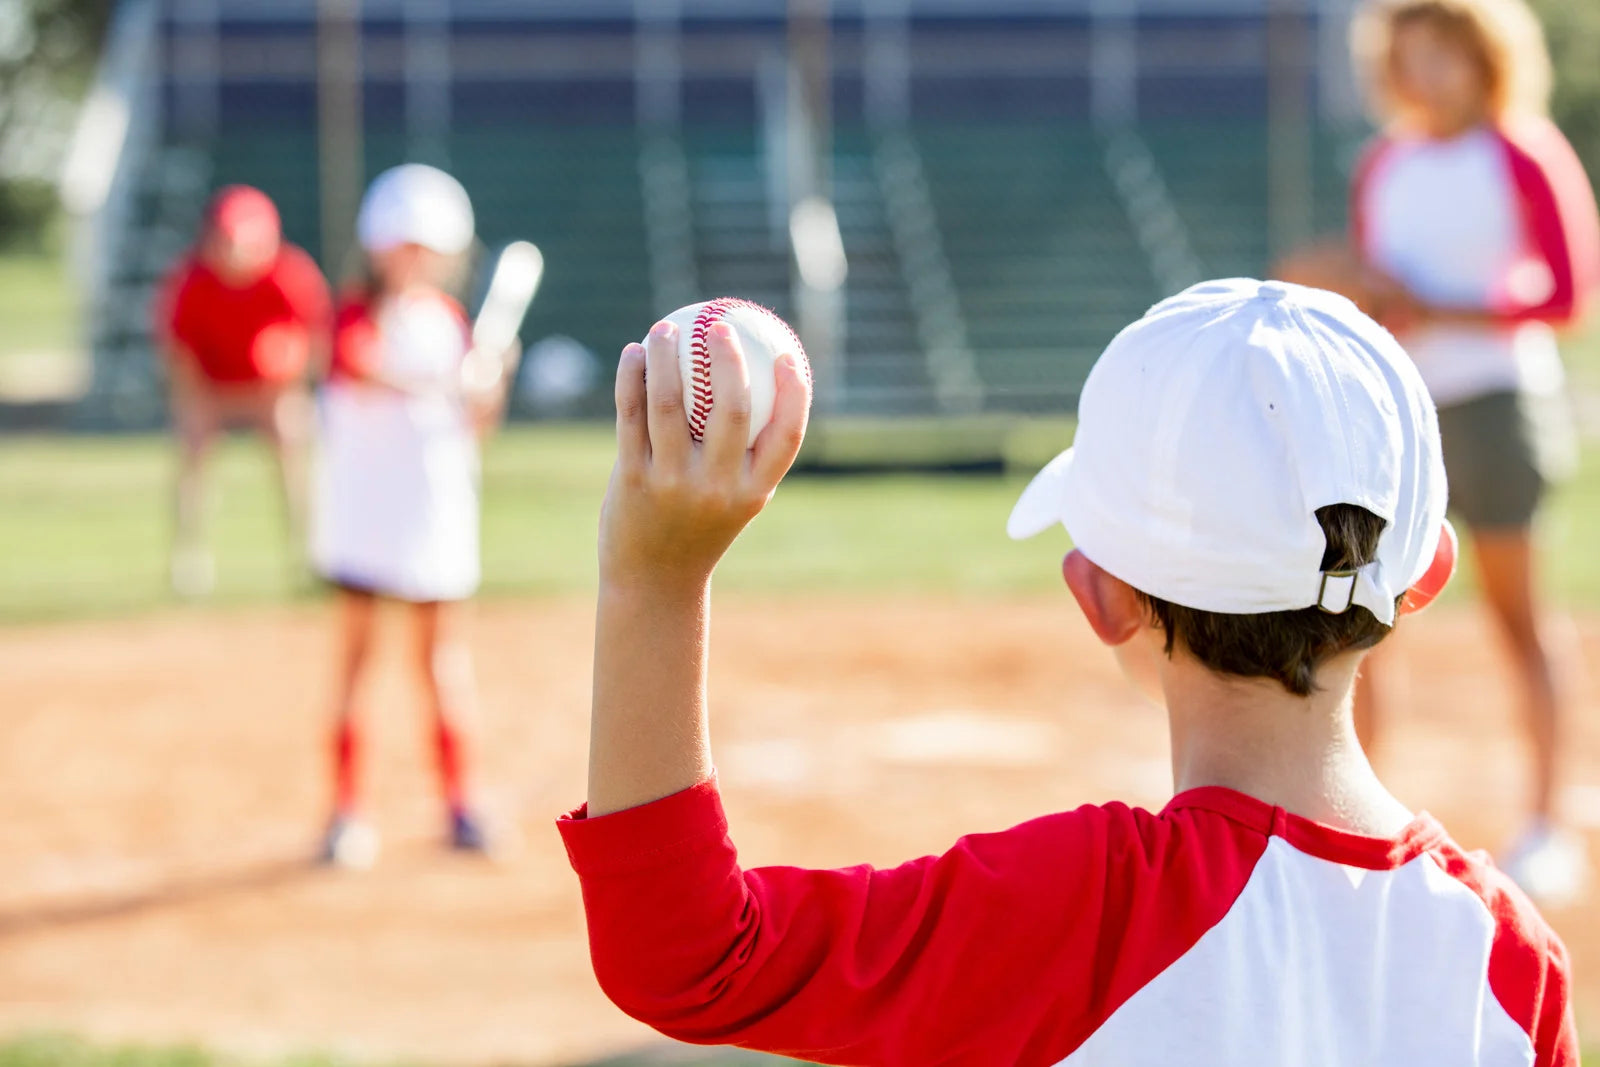 4 Easy Ways to Keep a Little League Pitch Count